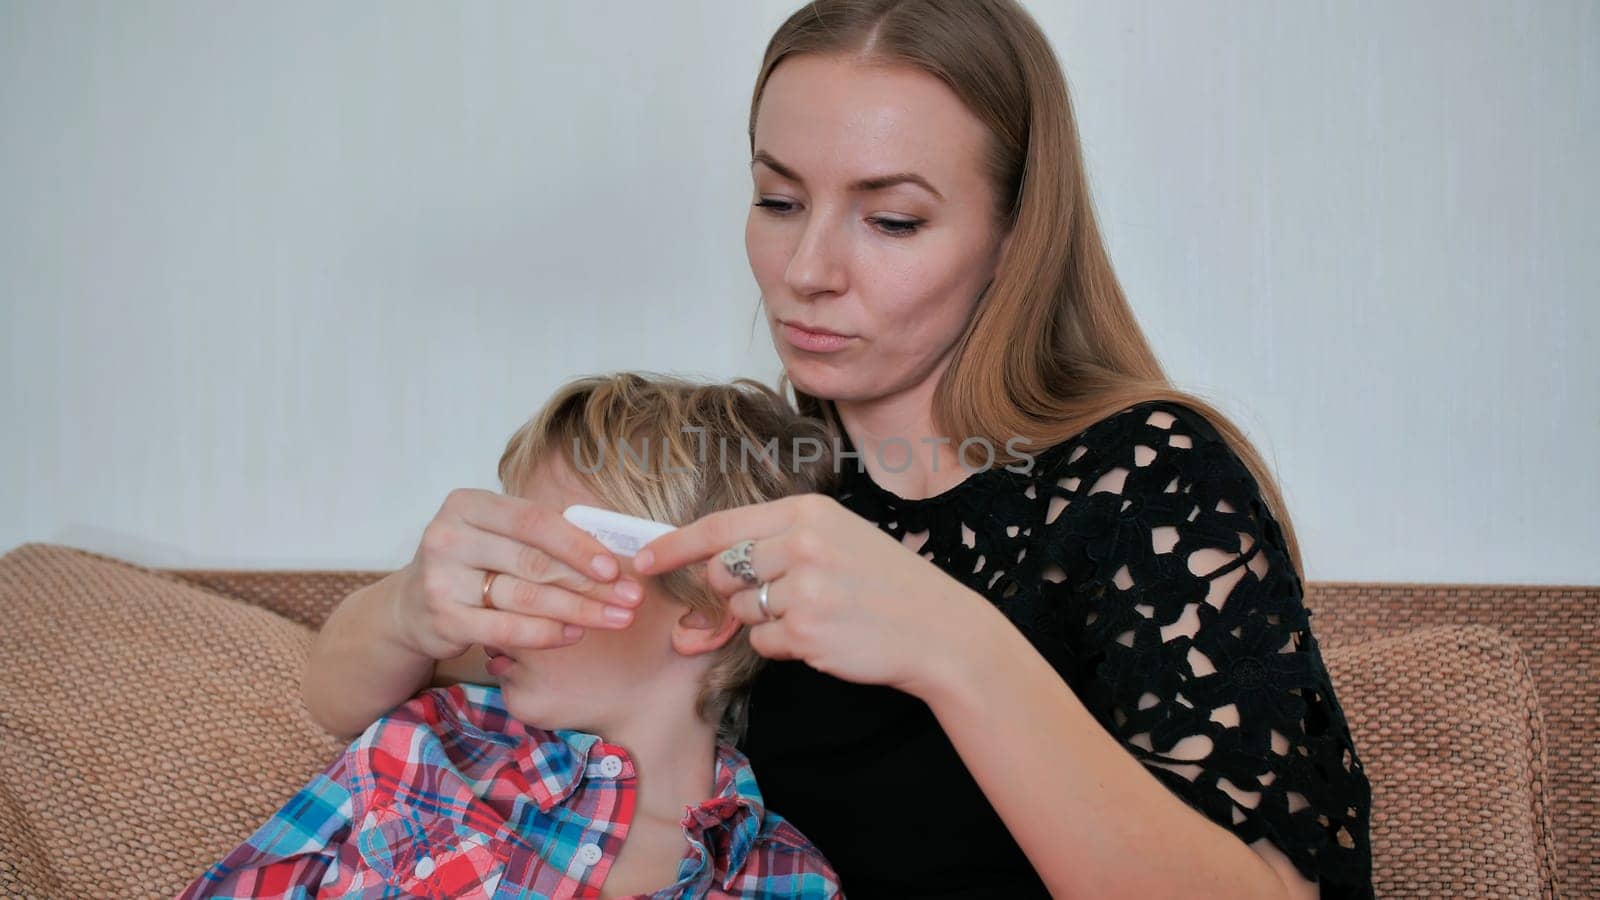 A caring mother measures the temperature of her son with a thermometer